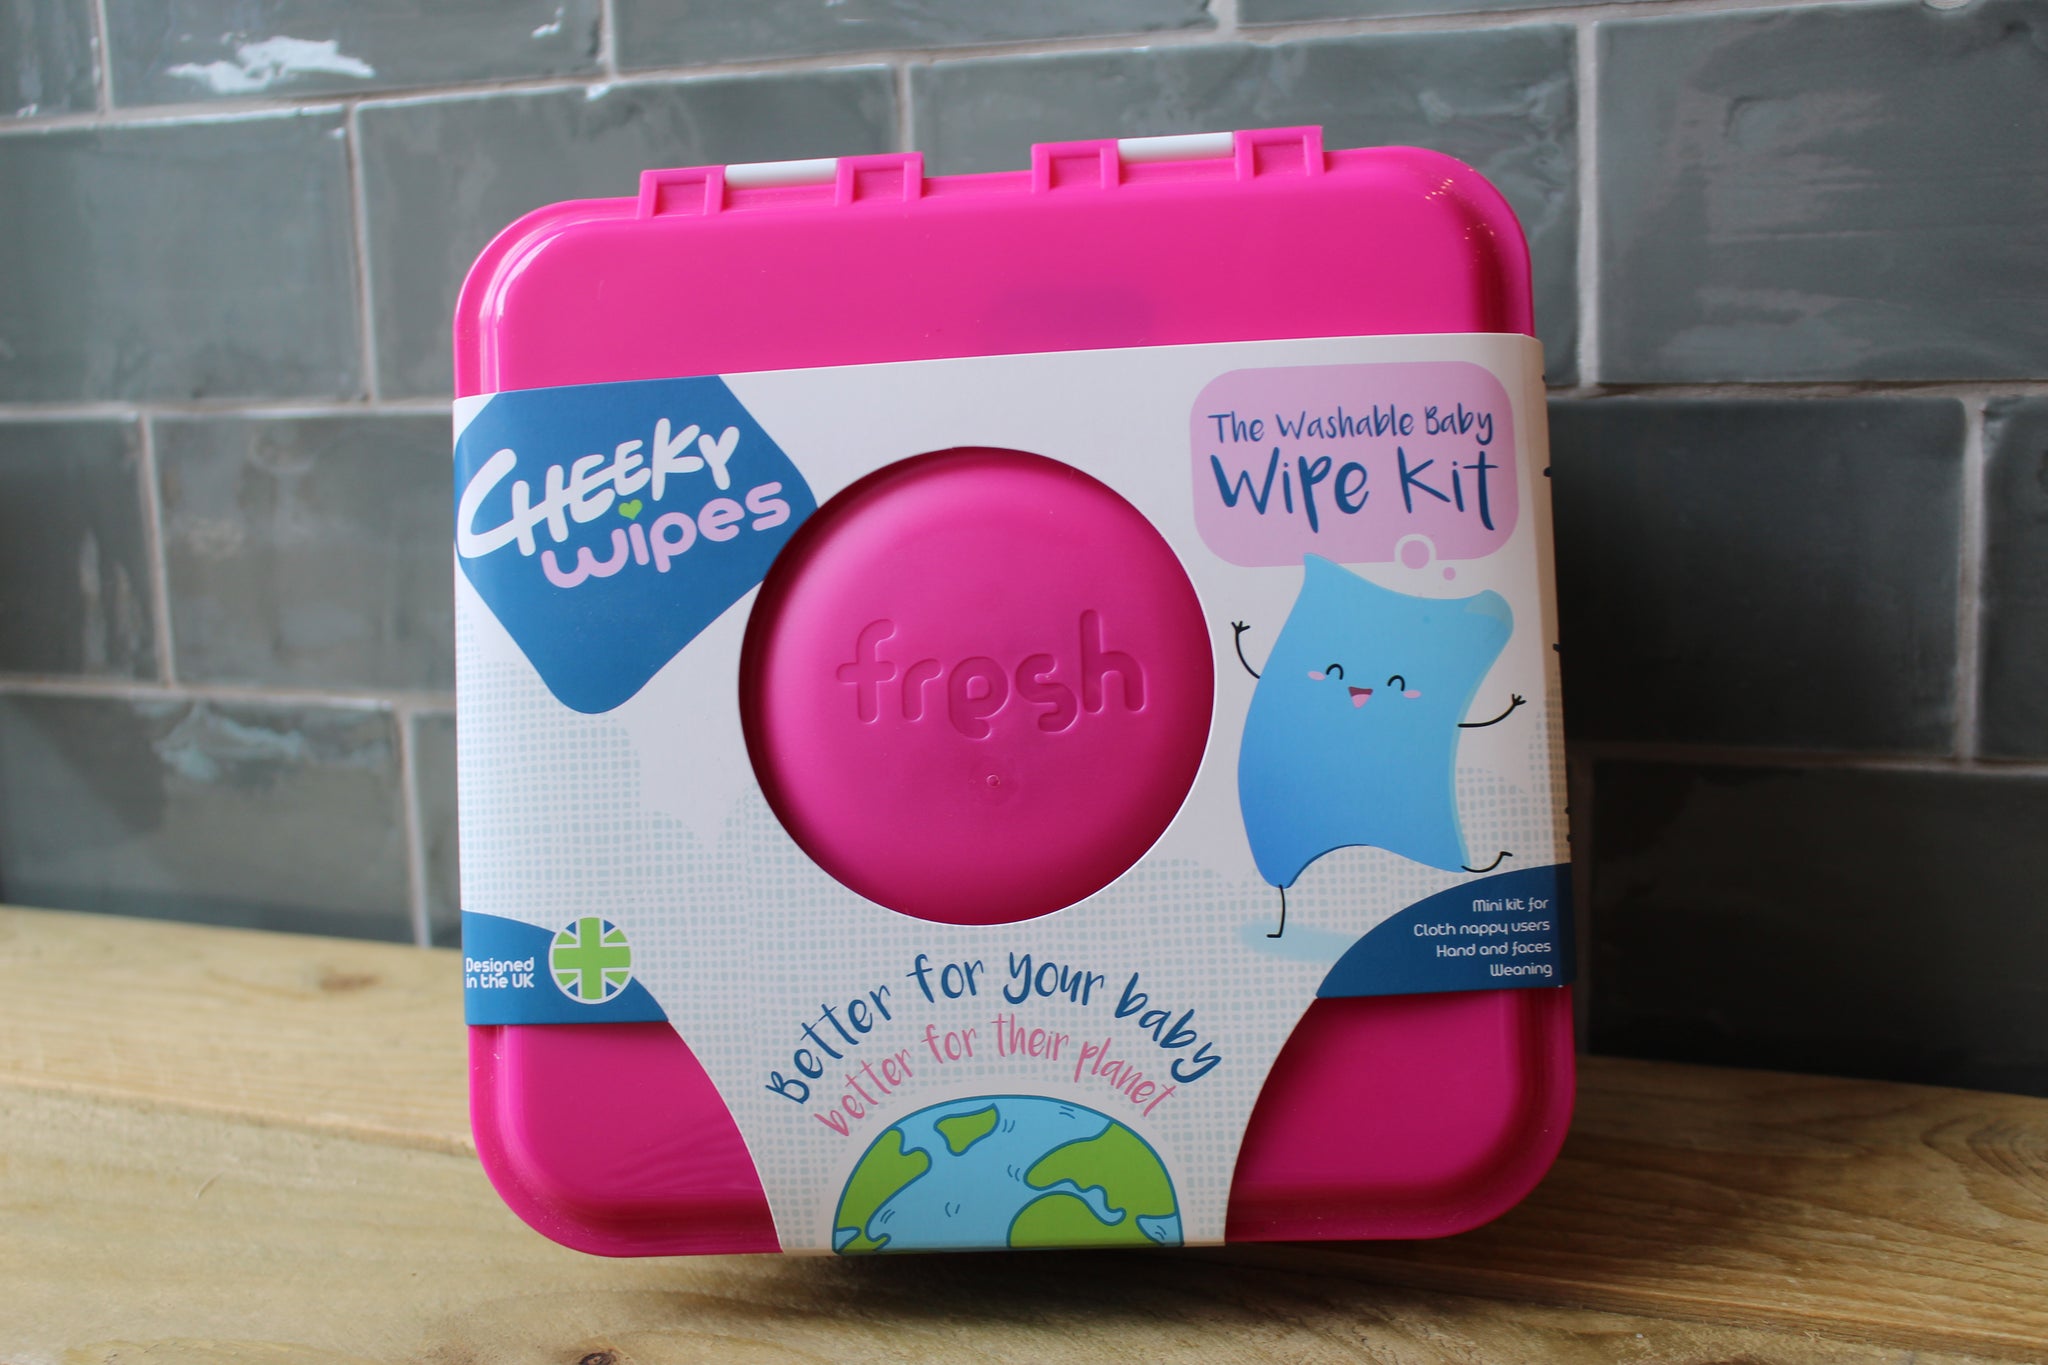 Cheeky Wipes cotton all-in-one kit - Bonbon Conceptstore